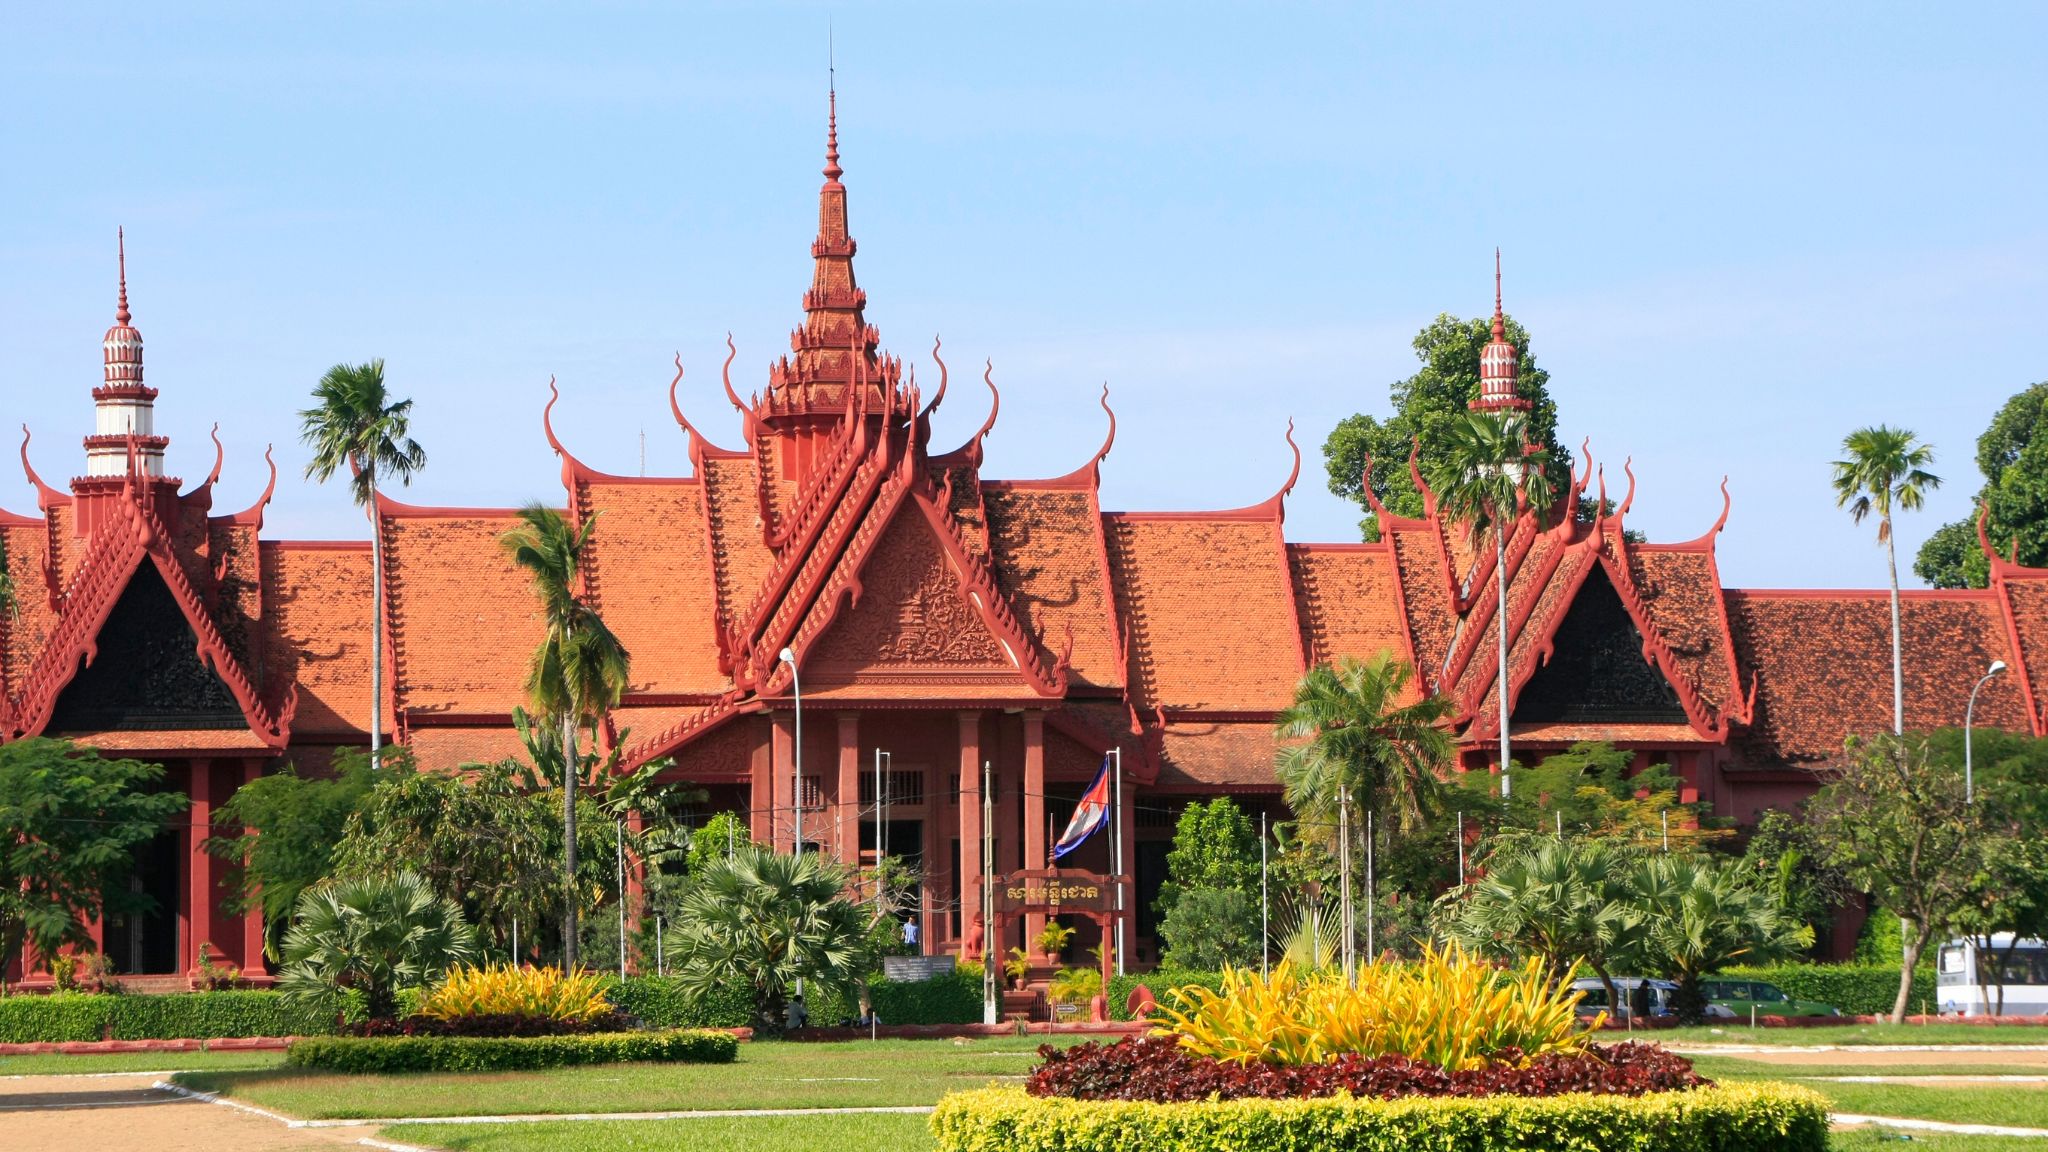 Day 6 Visit To The National Museum, Built In Traditional Khmer Style